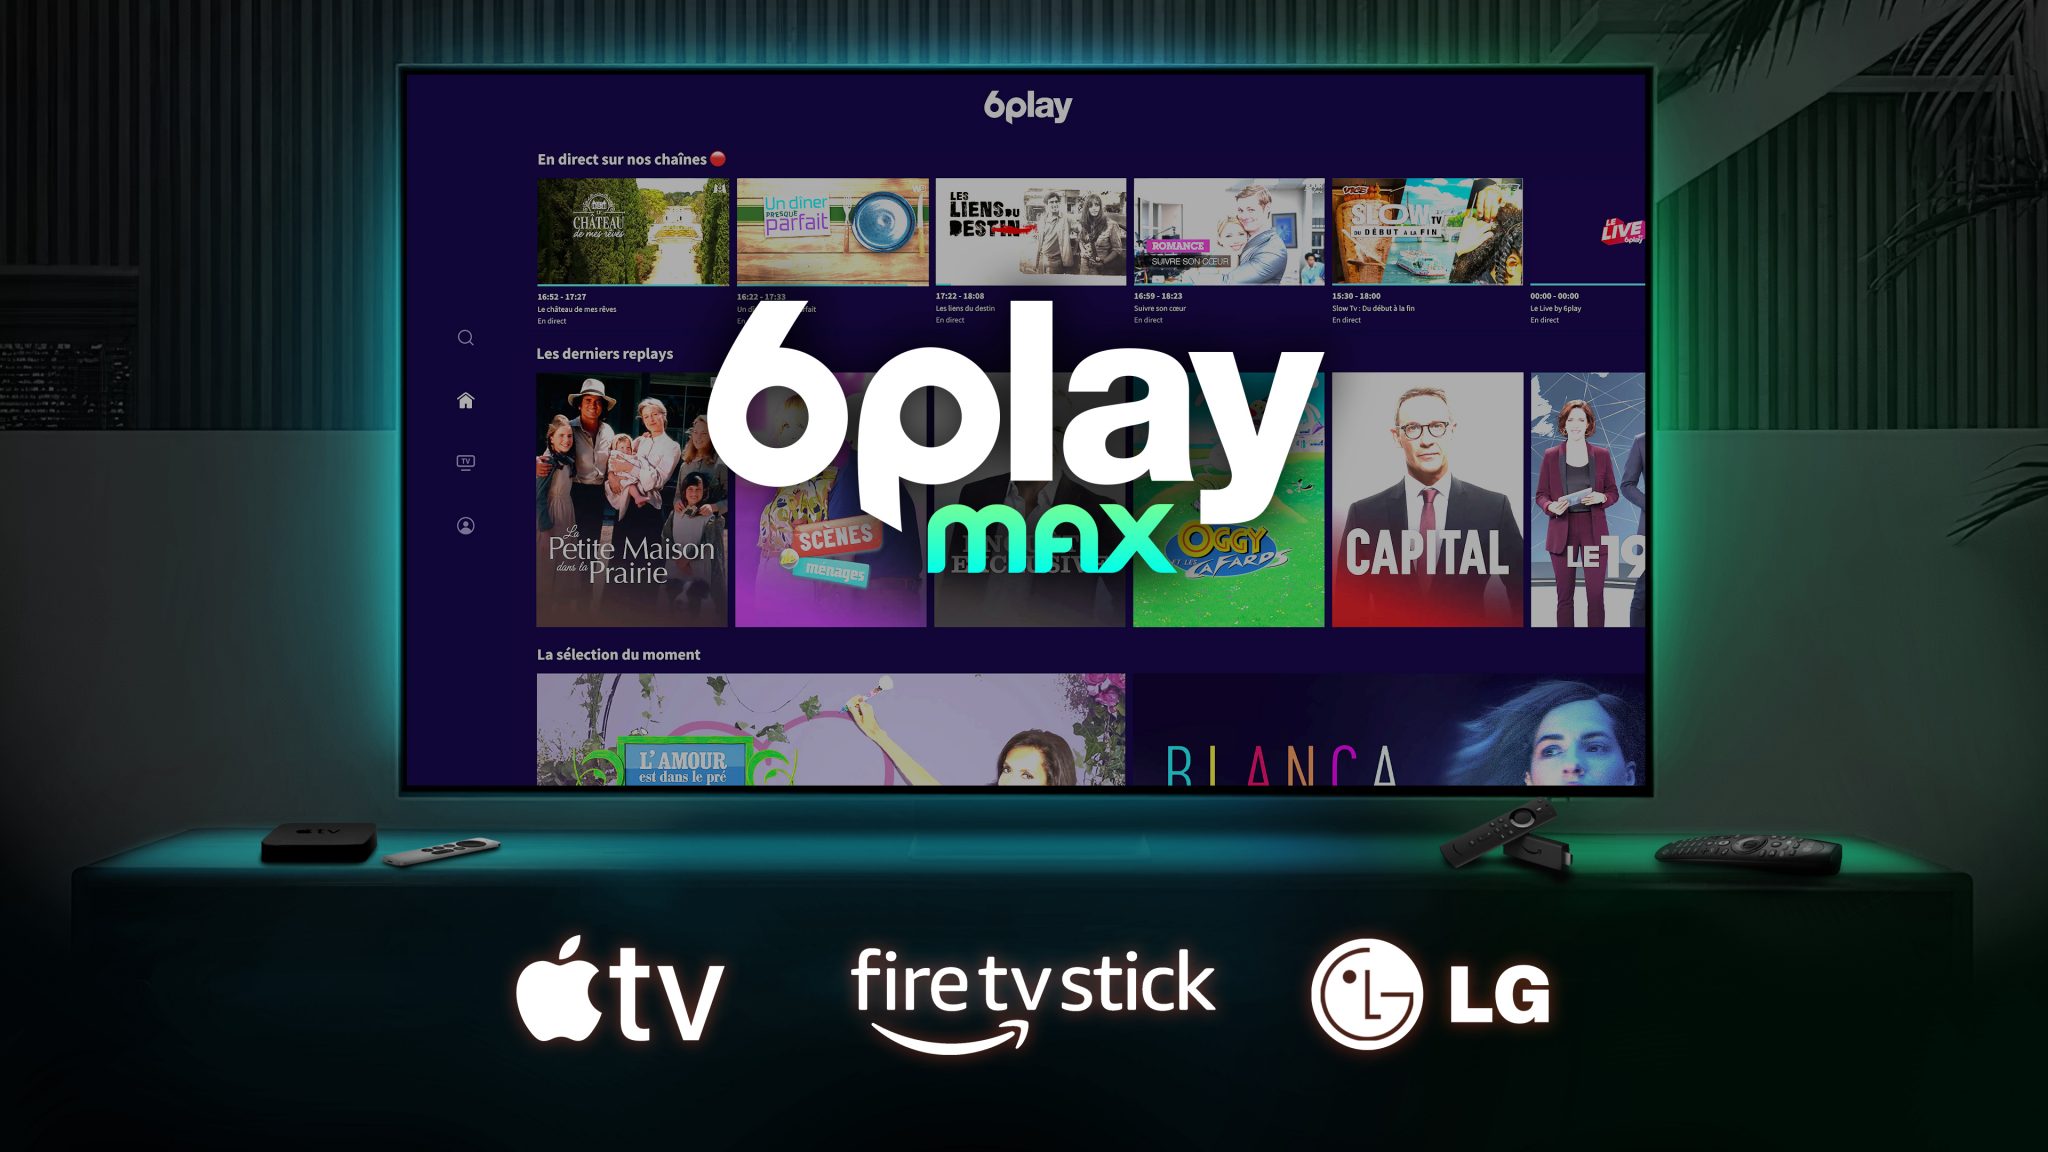 M6 extends 6play max to new devices with Bedrock - Digital TV Europe